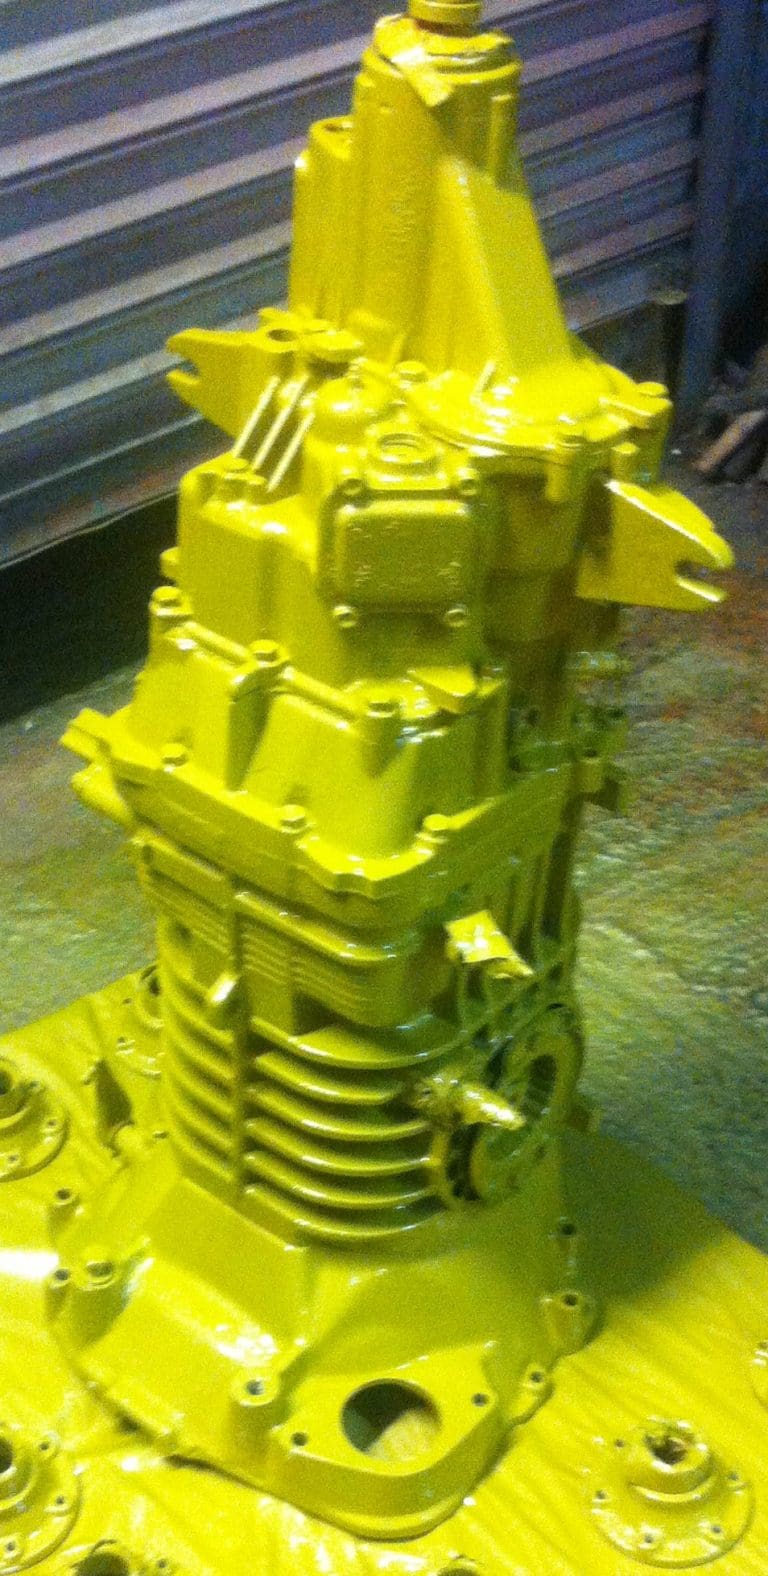 vw T3 Syncro gearbox in paint